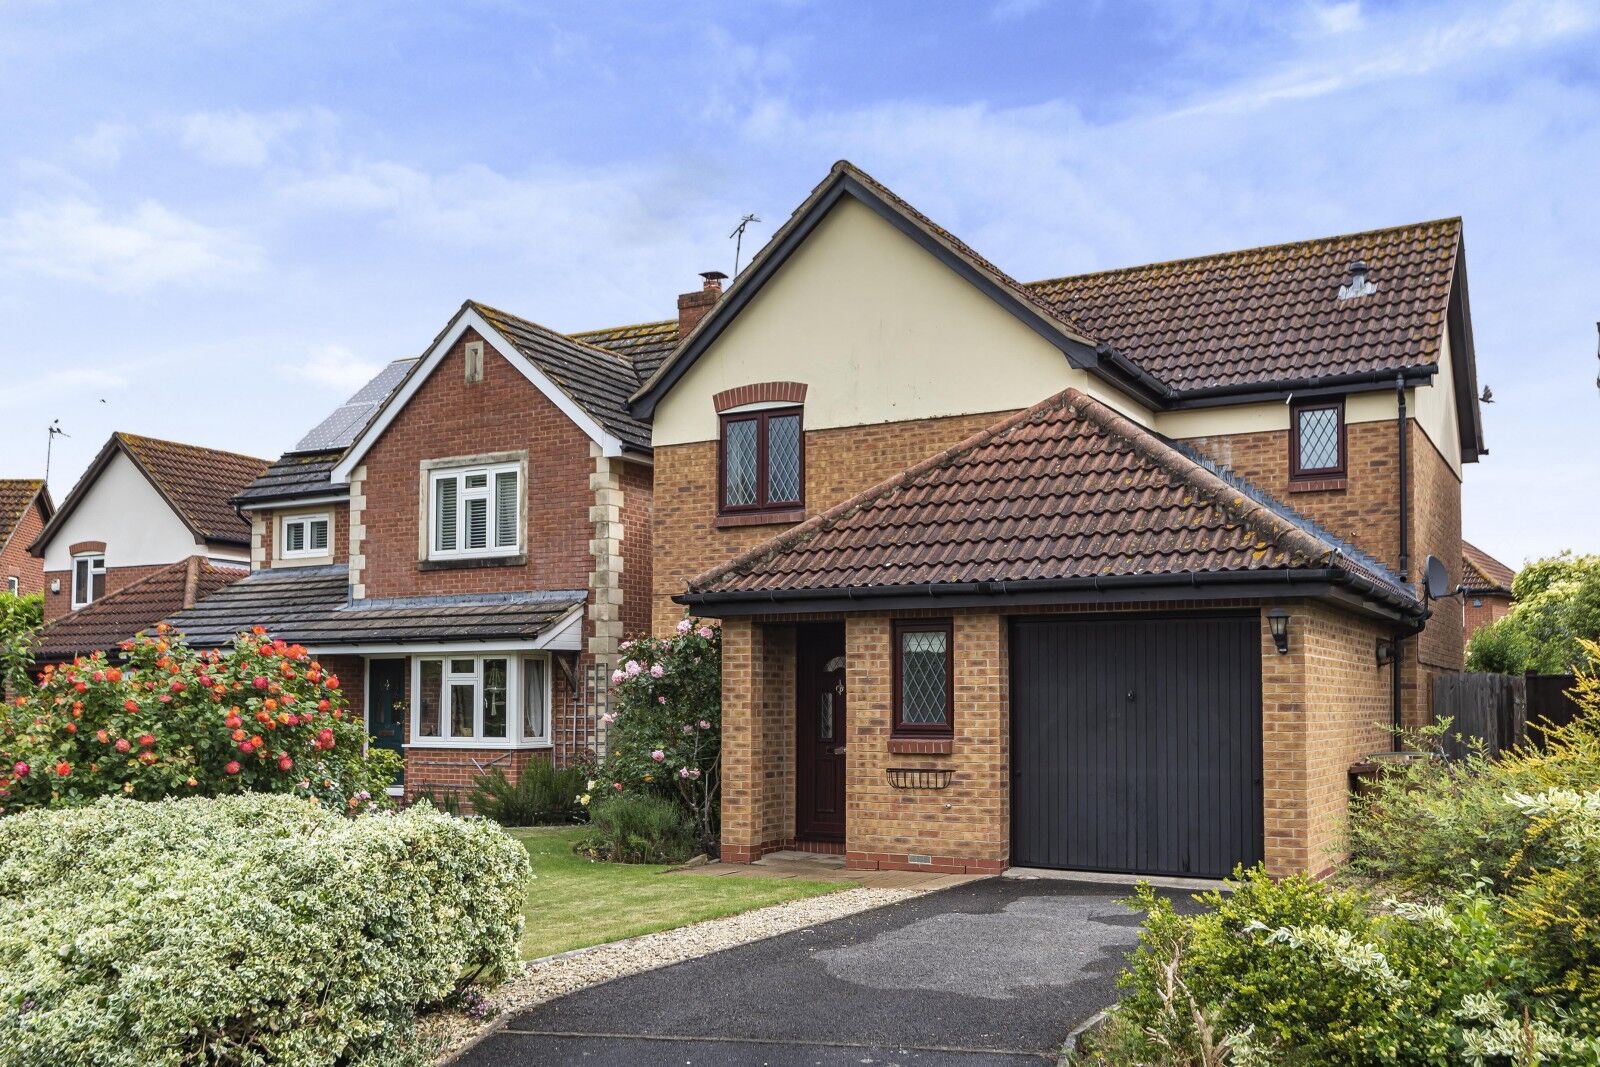 3 bedroom detached house for sale Westwater Way, Didcot, OX11, main image